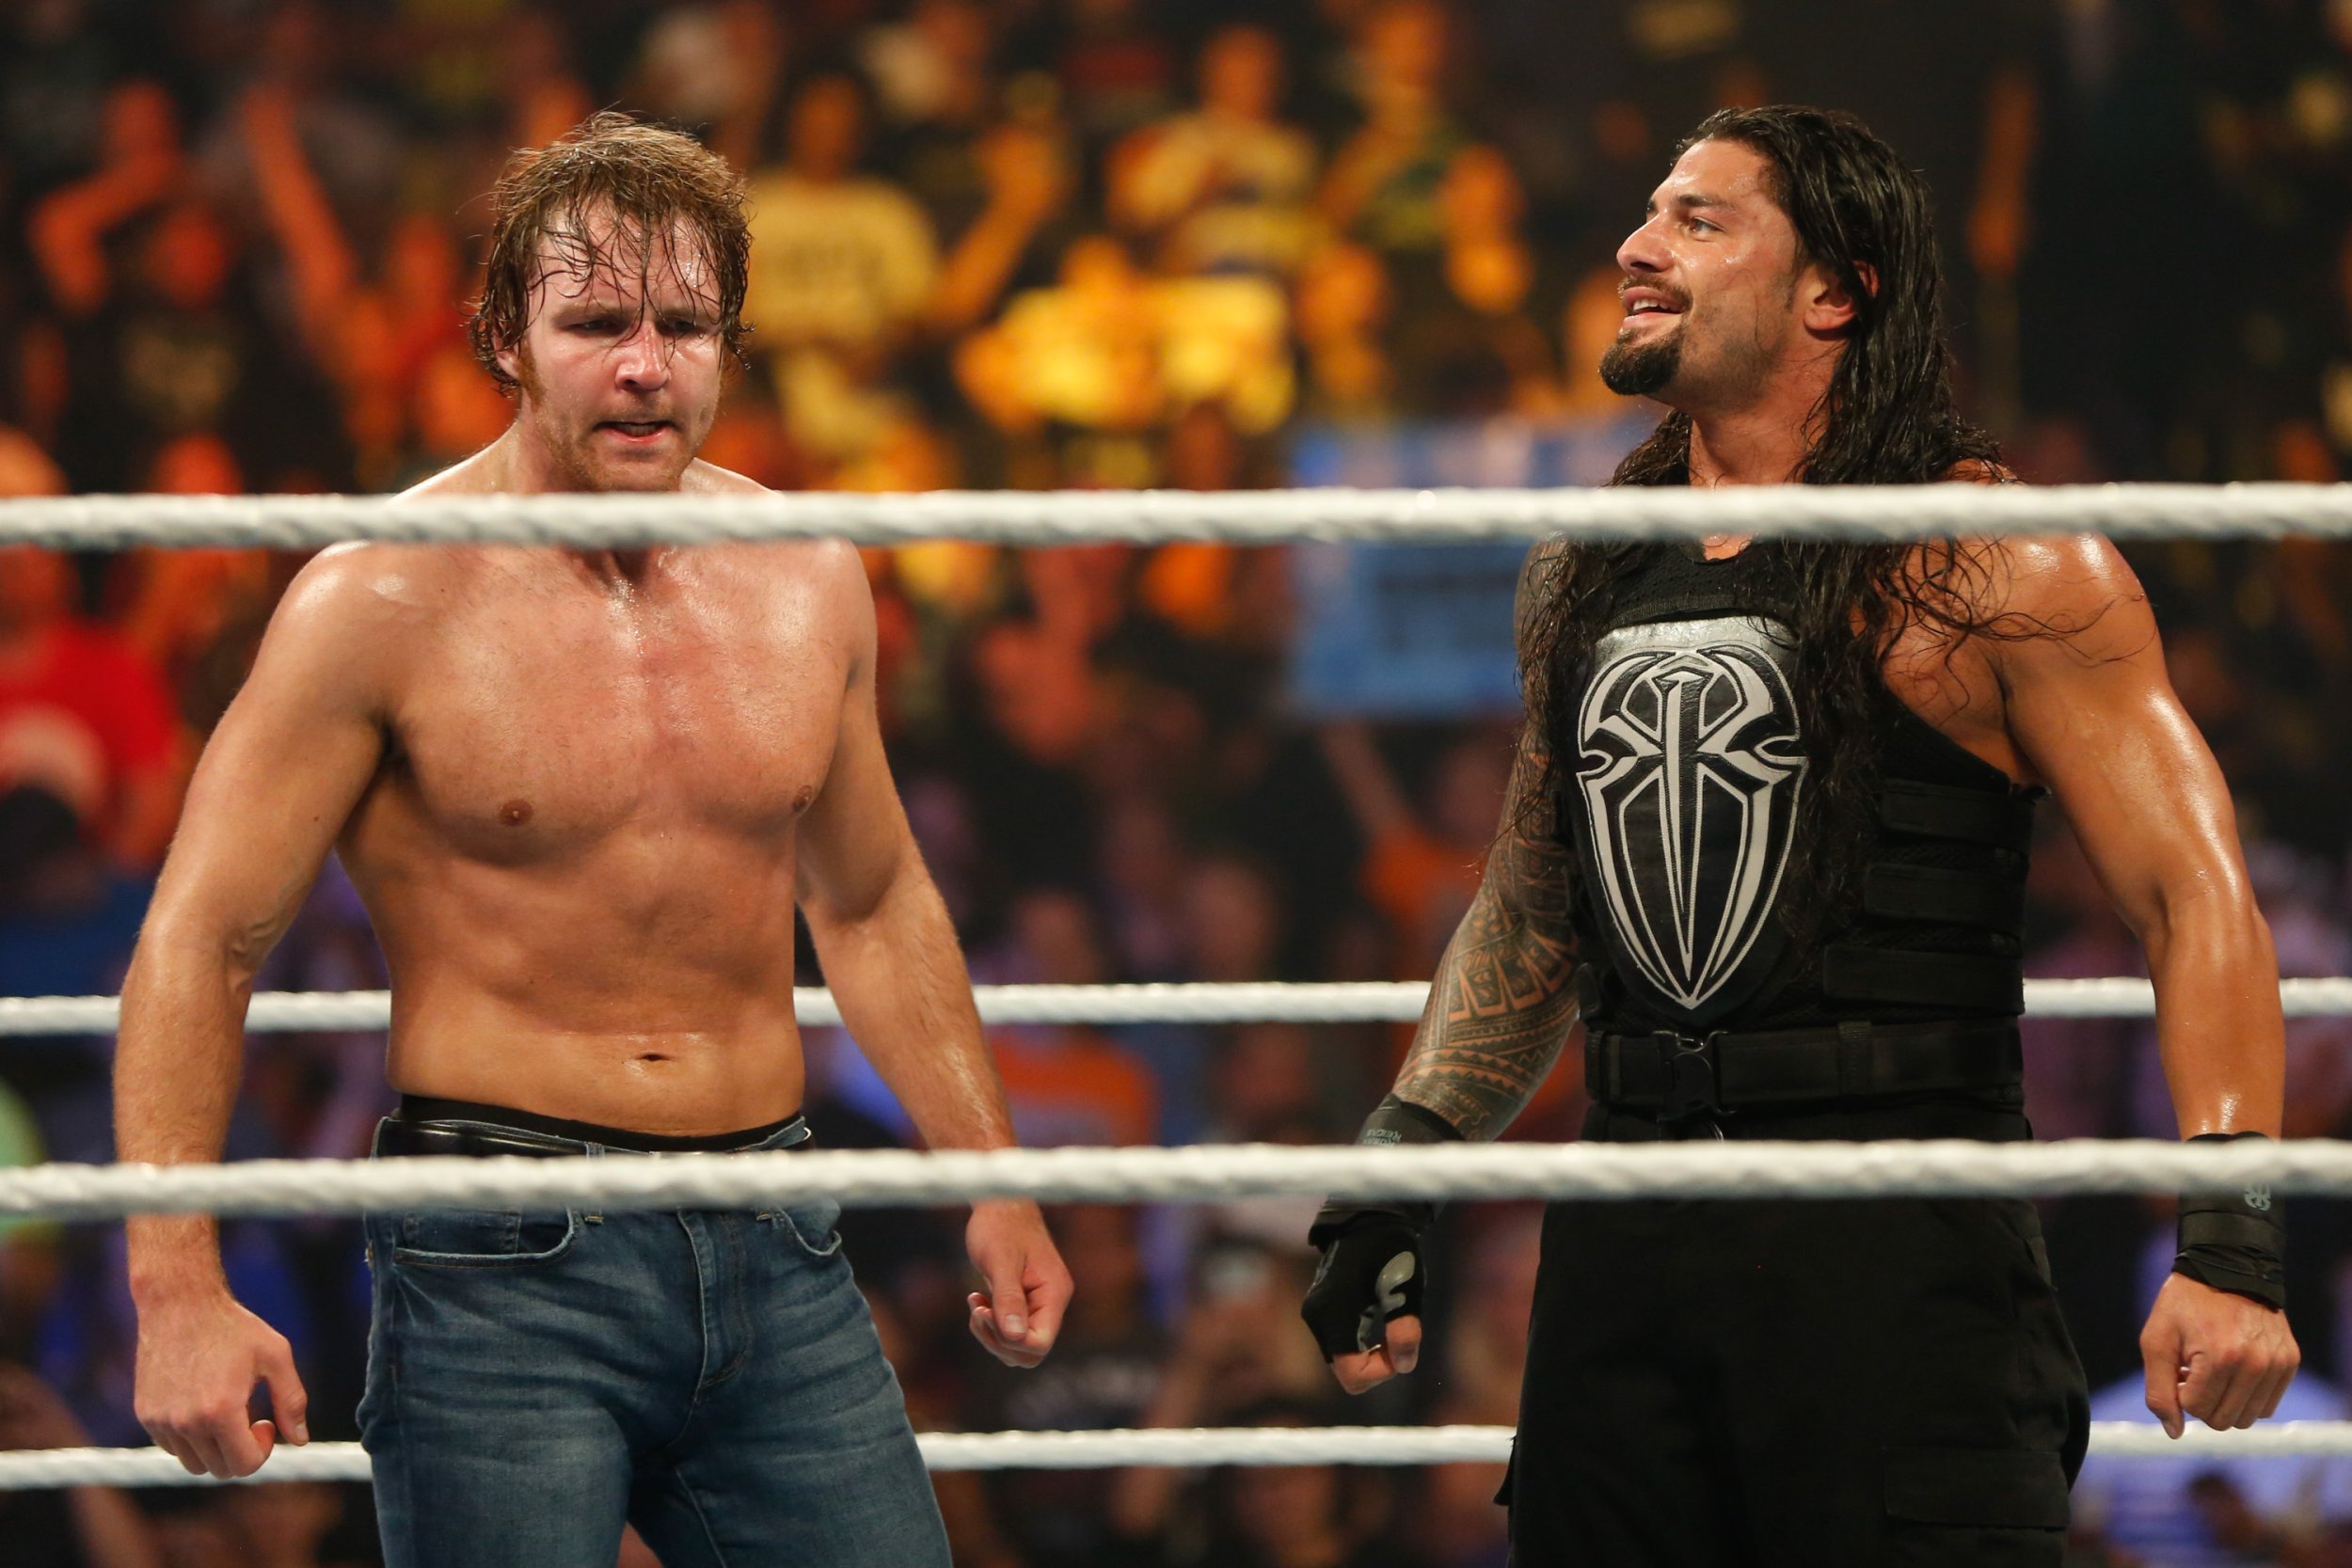 WWE Extreme Rules 2016 Live Stream And Free Online Info, PPV Details, Betting Odds IBTimes